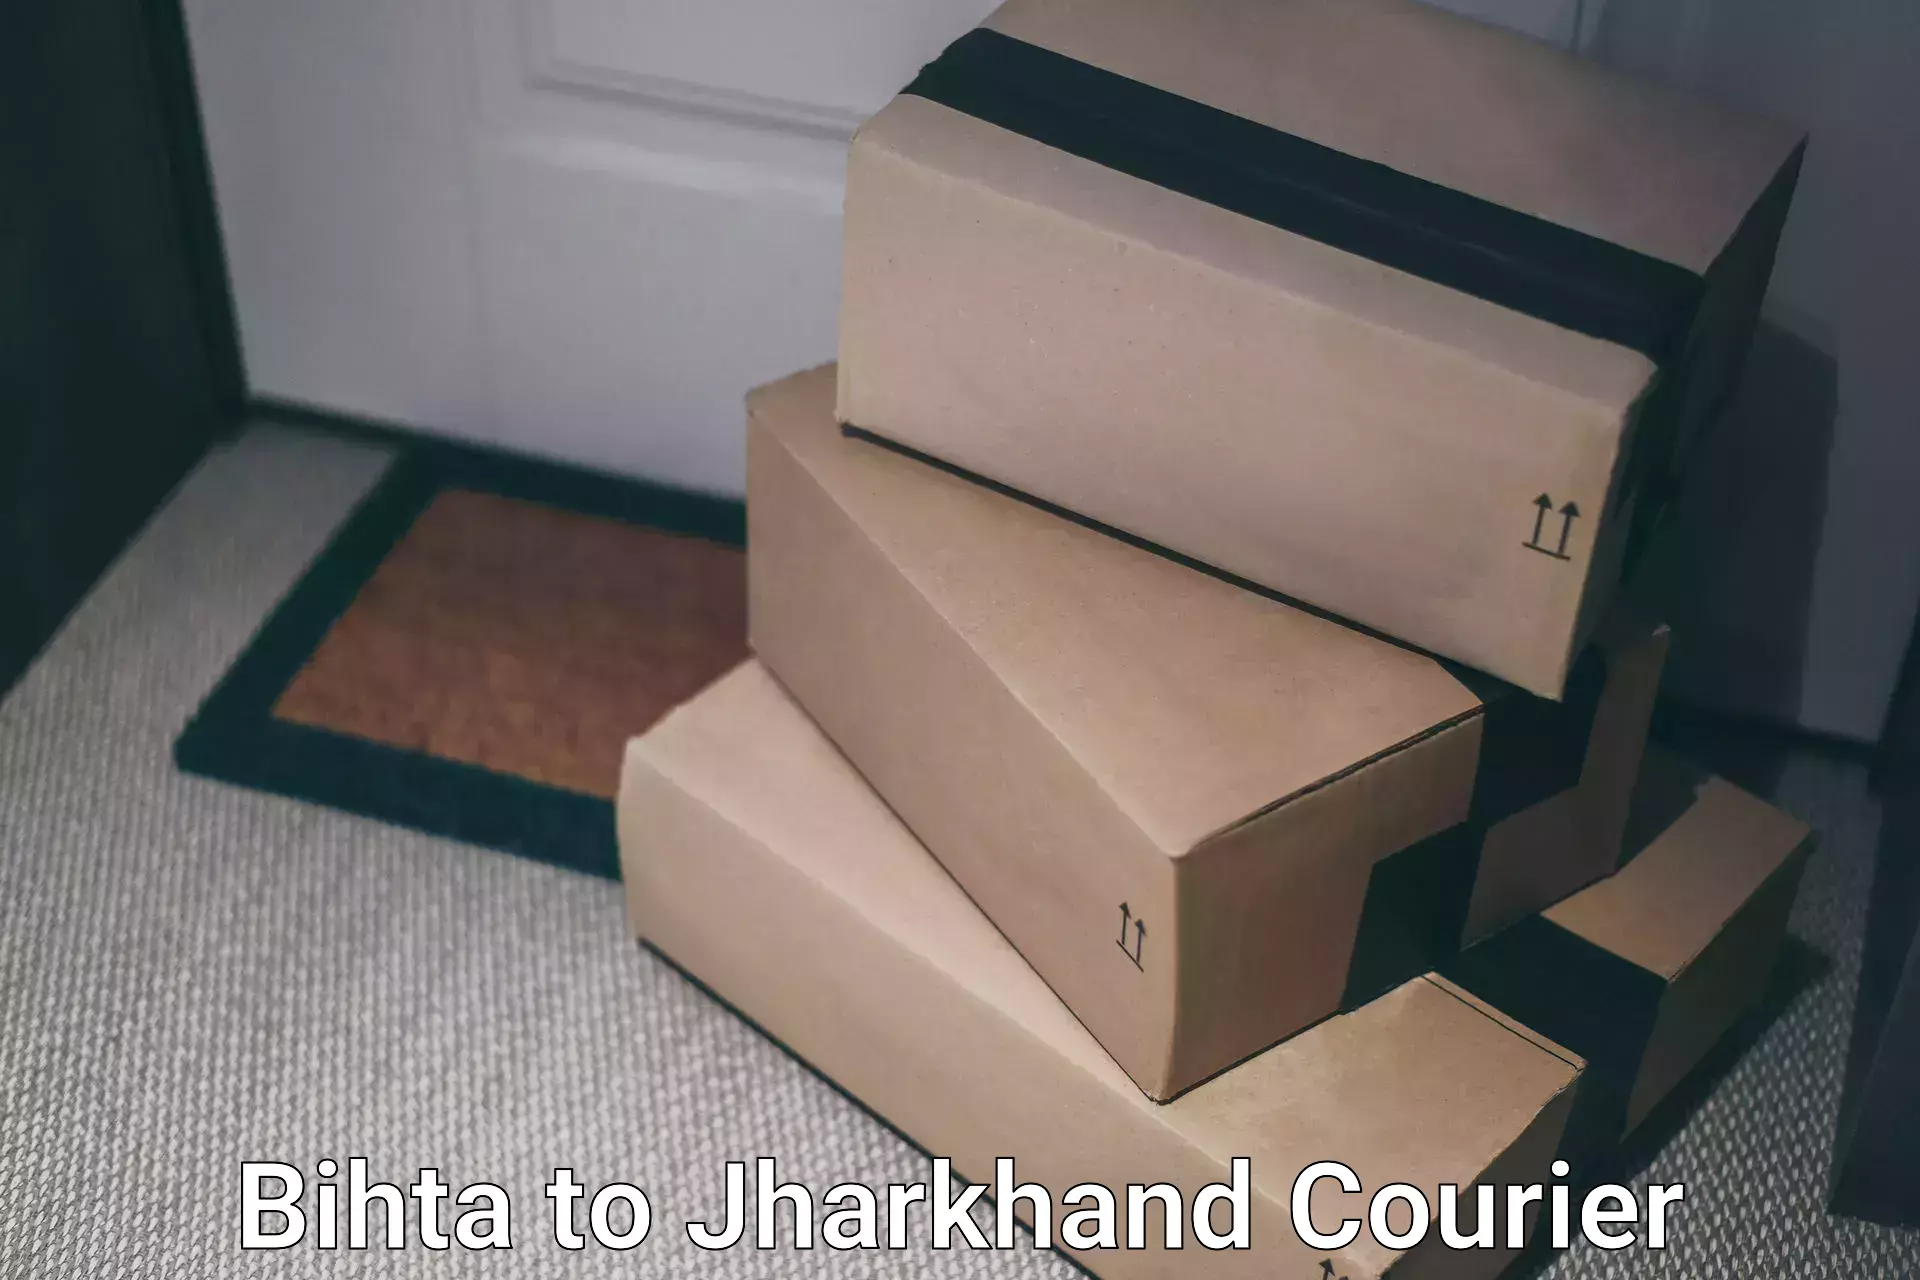 Reliable courier service in Bihta to Daltonganj